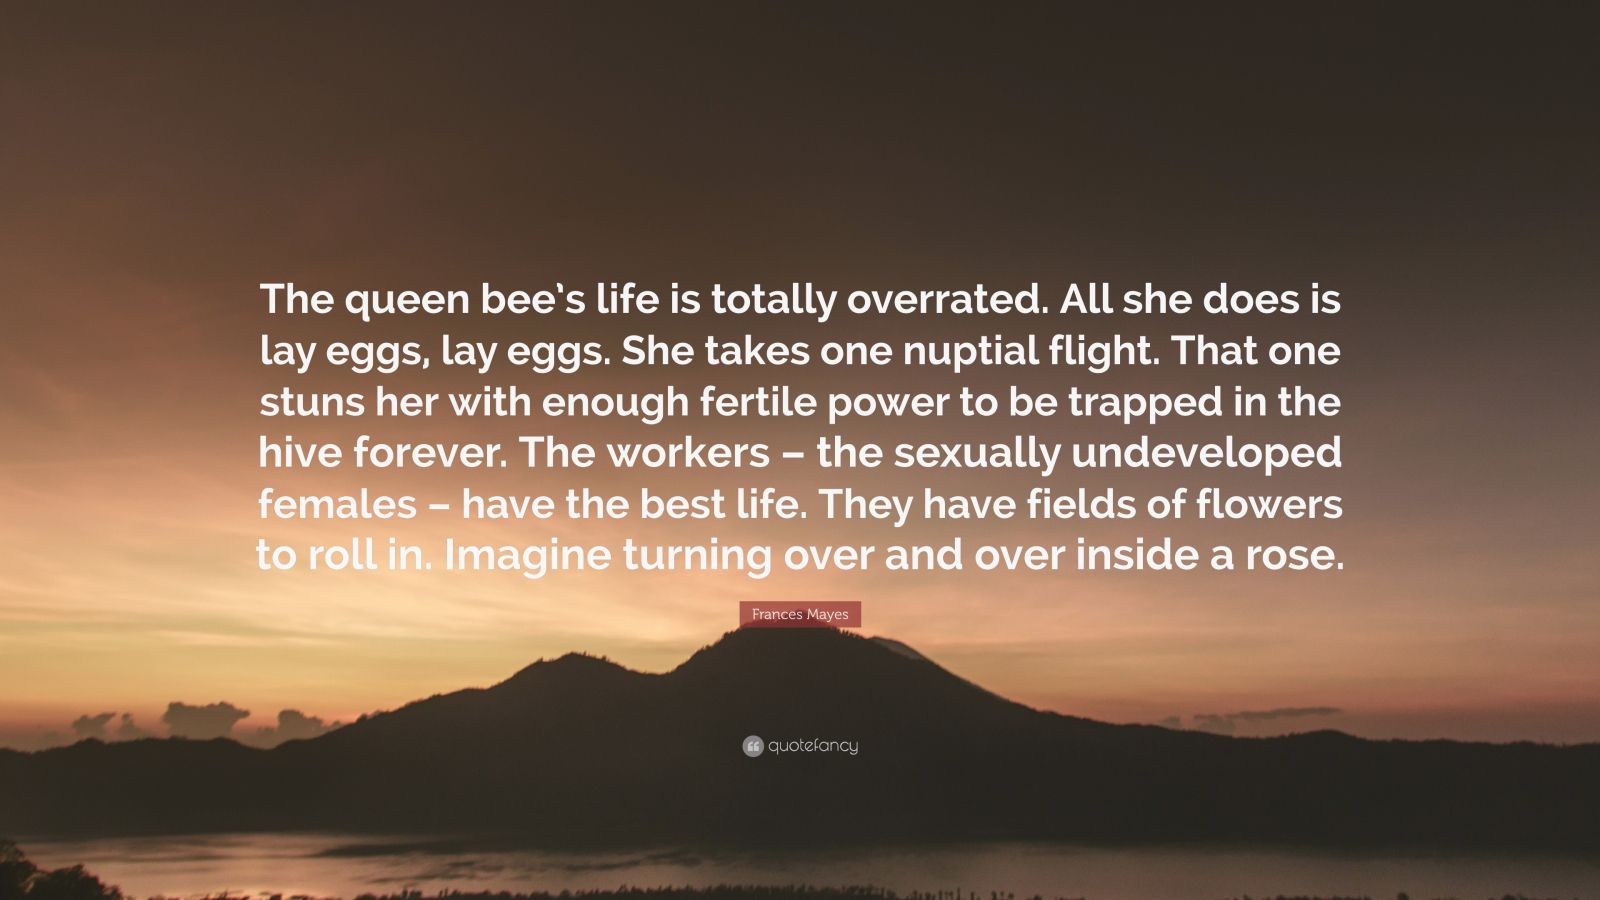 Frances Mayes Quote: “The queen bee’s life is totally overrated. All ...